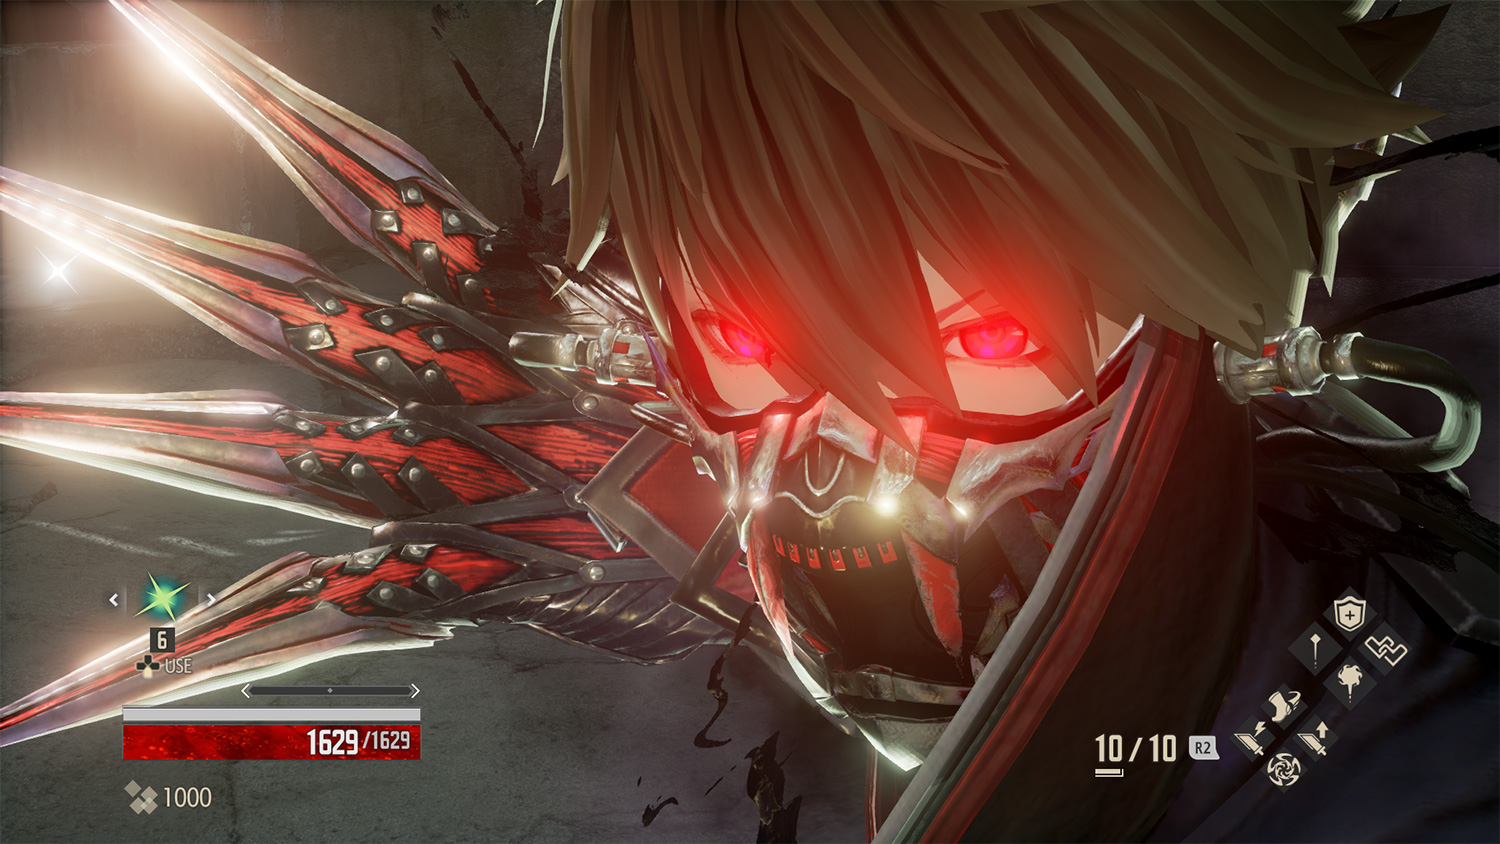 Share Your Character Creations! - CODE VEIN - PSNProfiles